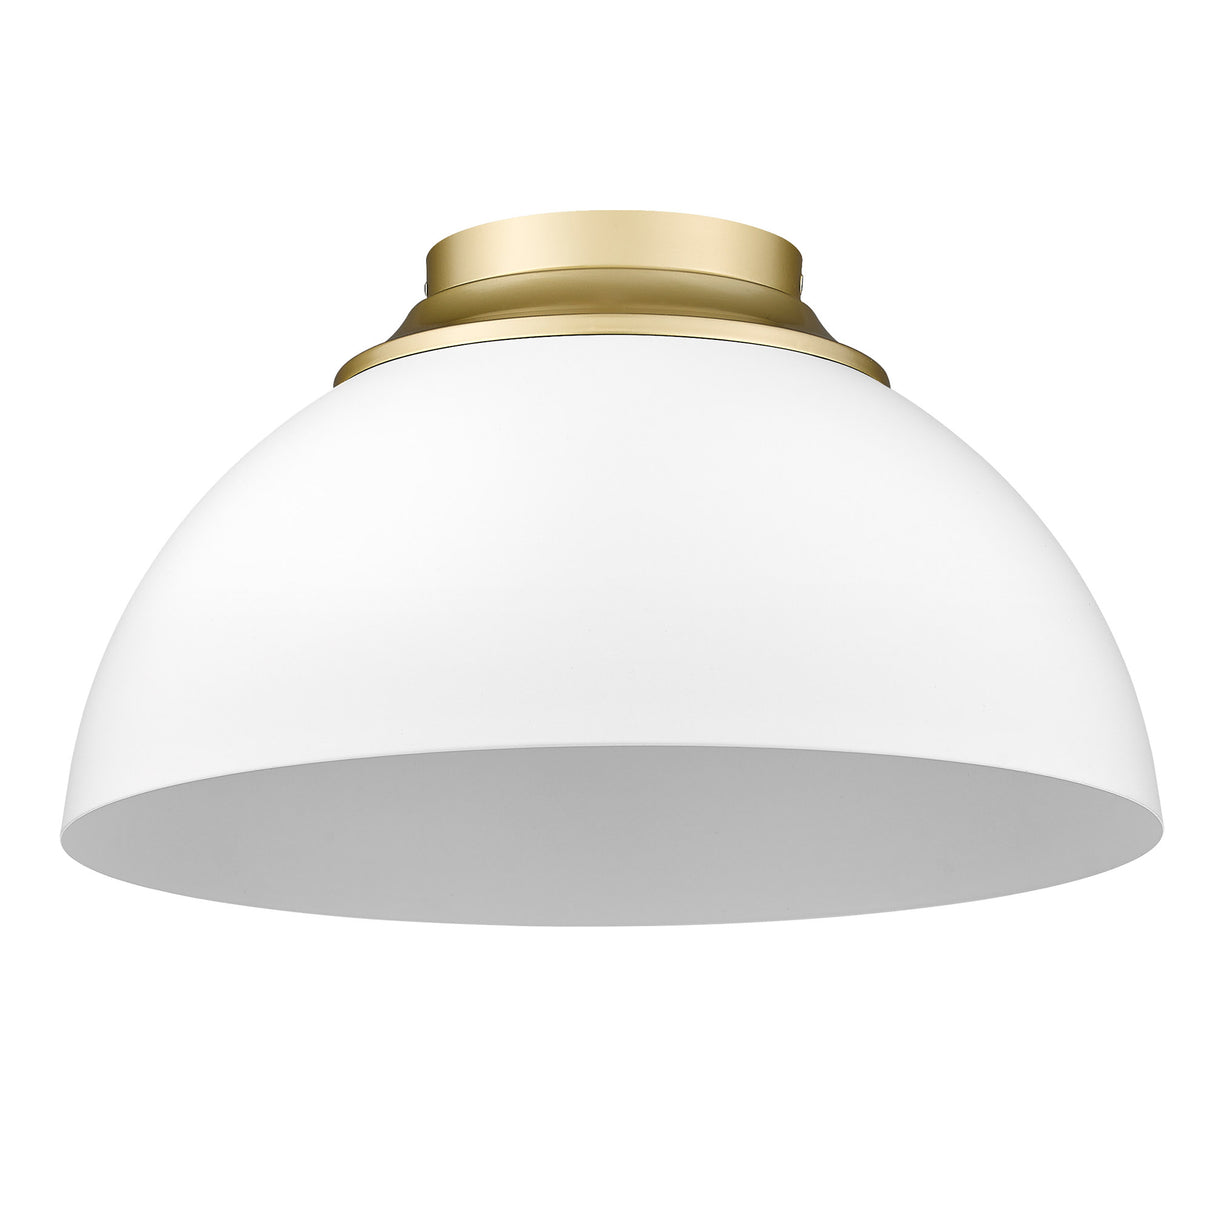 Zoey Flush Mount in Olympic Gold with Matte White Shade